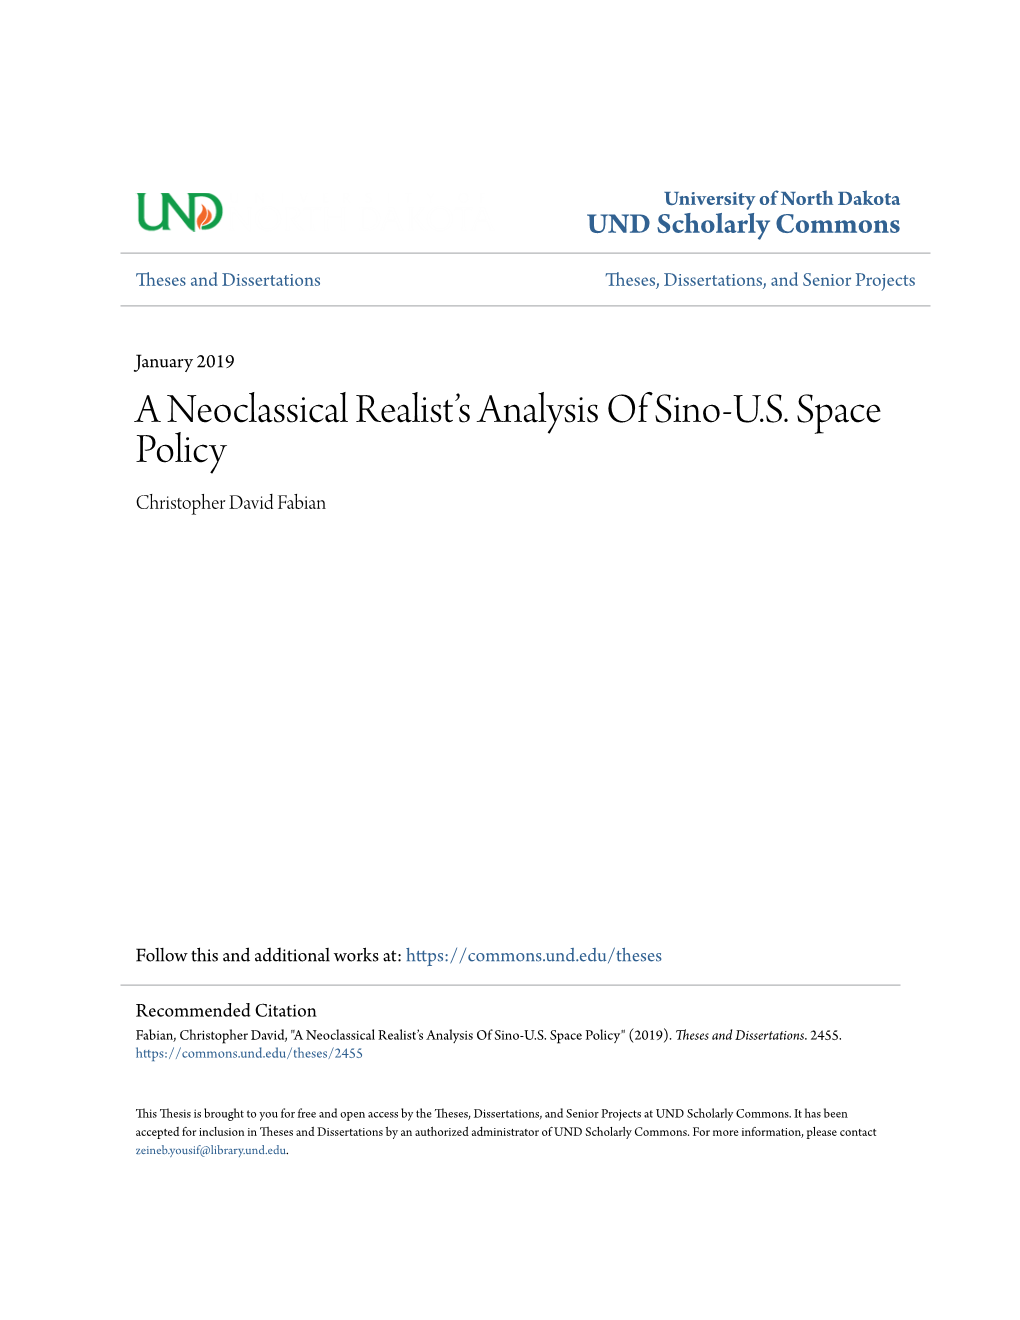 A Neoclassical Realist's Analysis of Sino-U.S. Space Policy